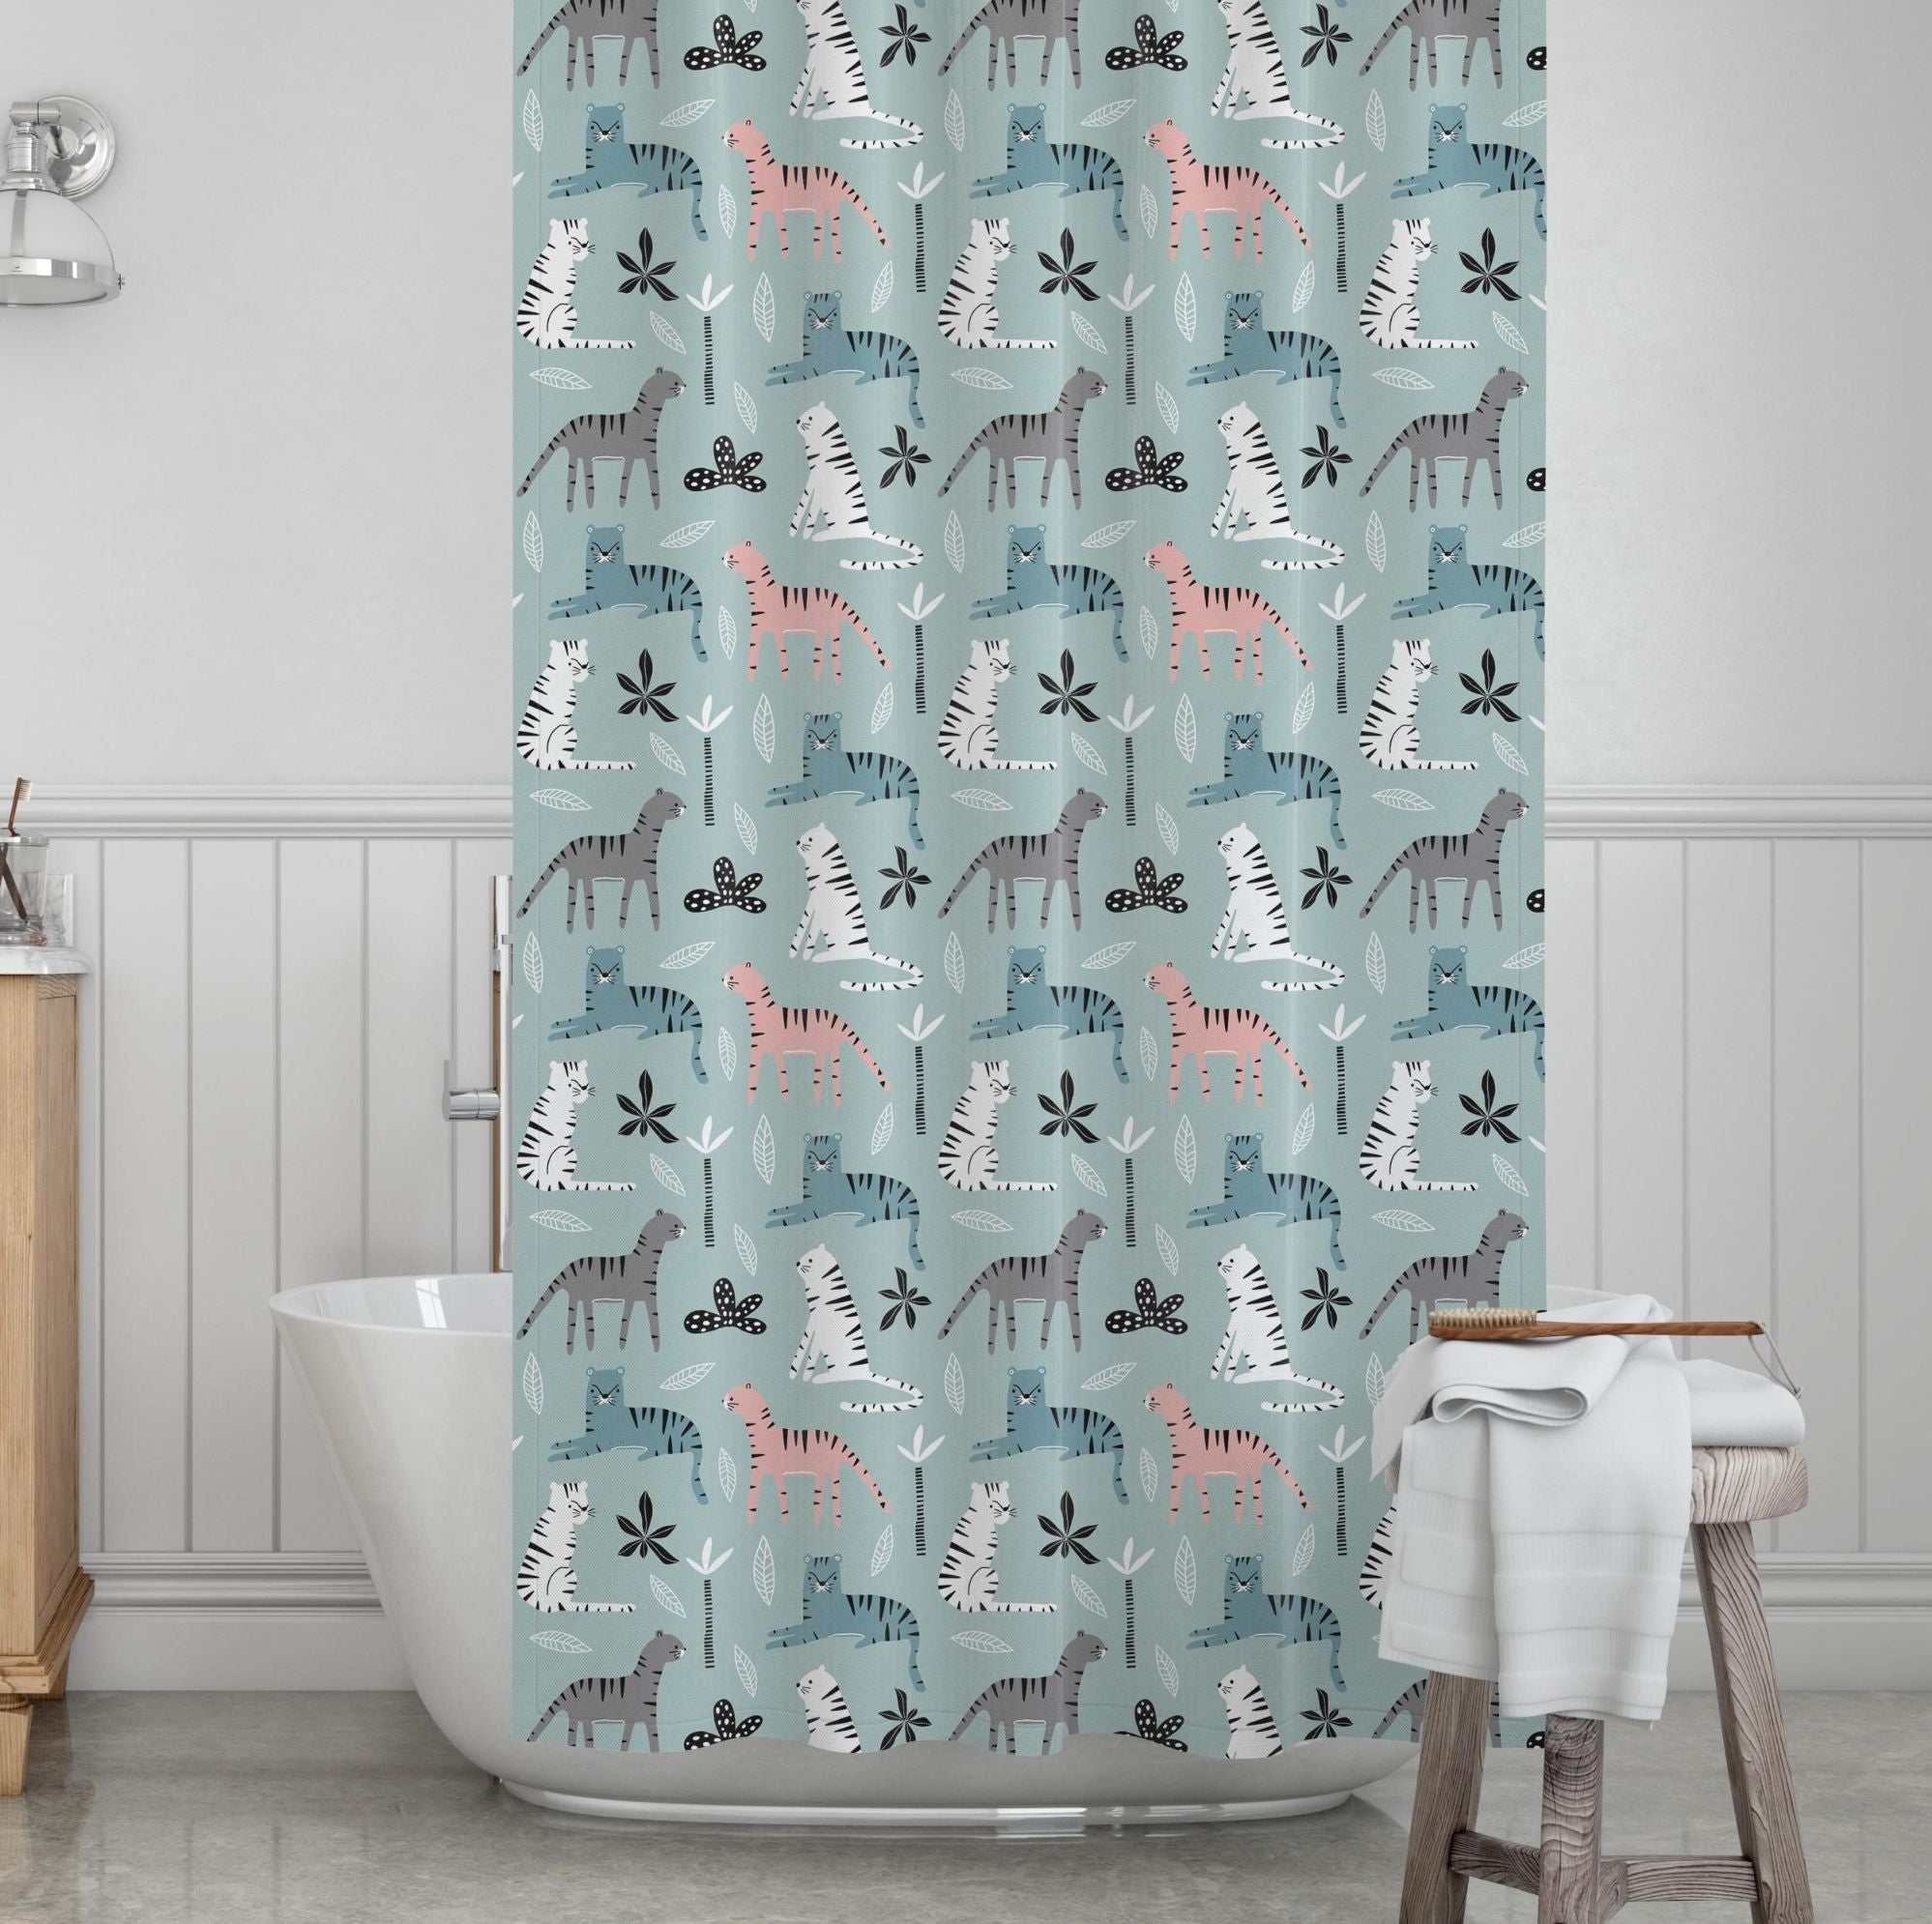 Tiger Kids' Shower Curtains - Big Catty-Tude